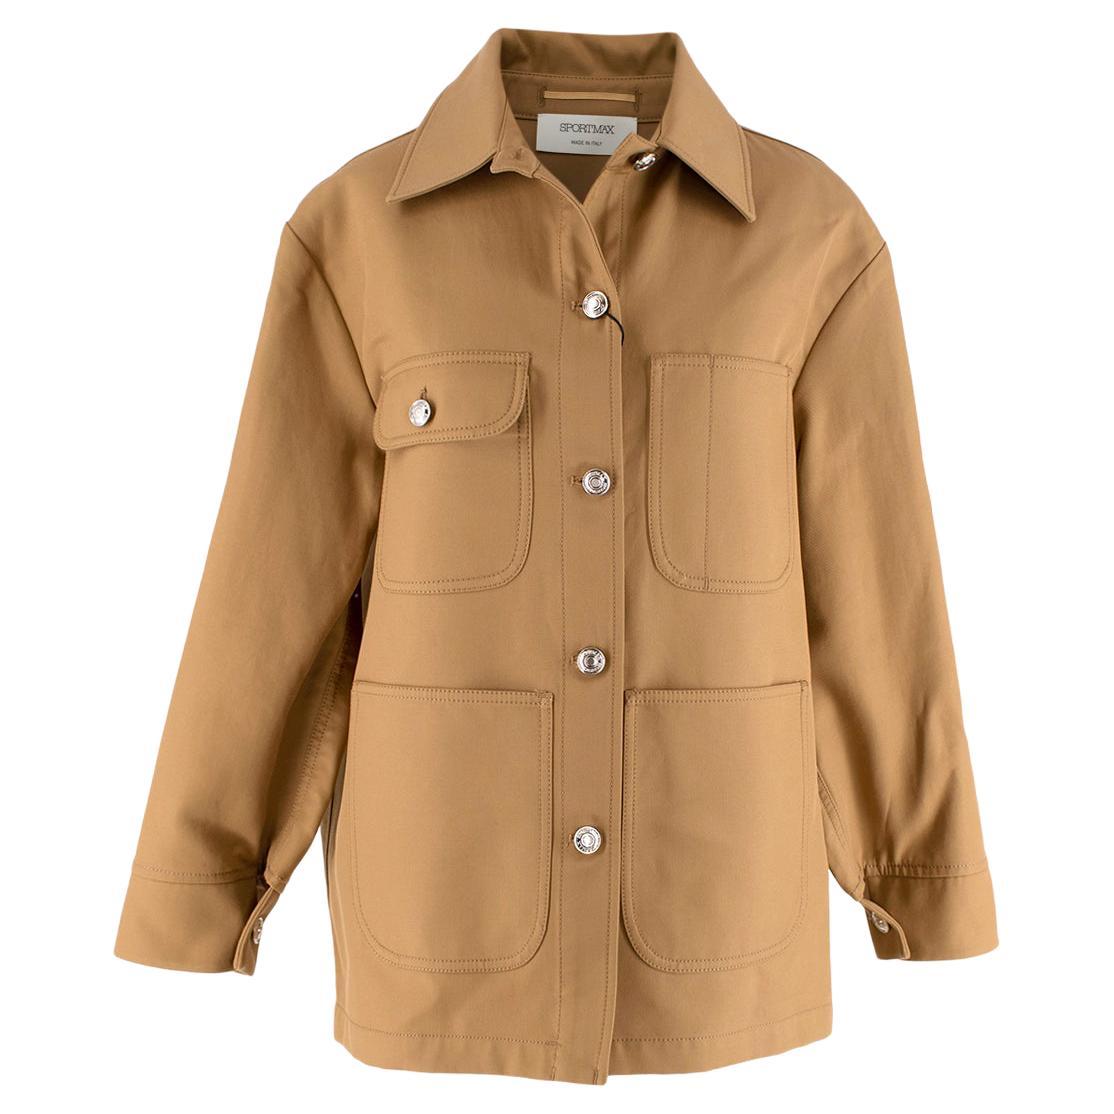 Sportmax Olmo Tobacco Cotton Jacket - US 0/2 For Sale